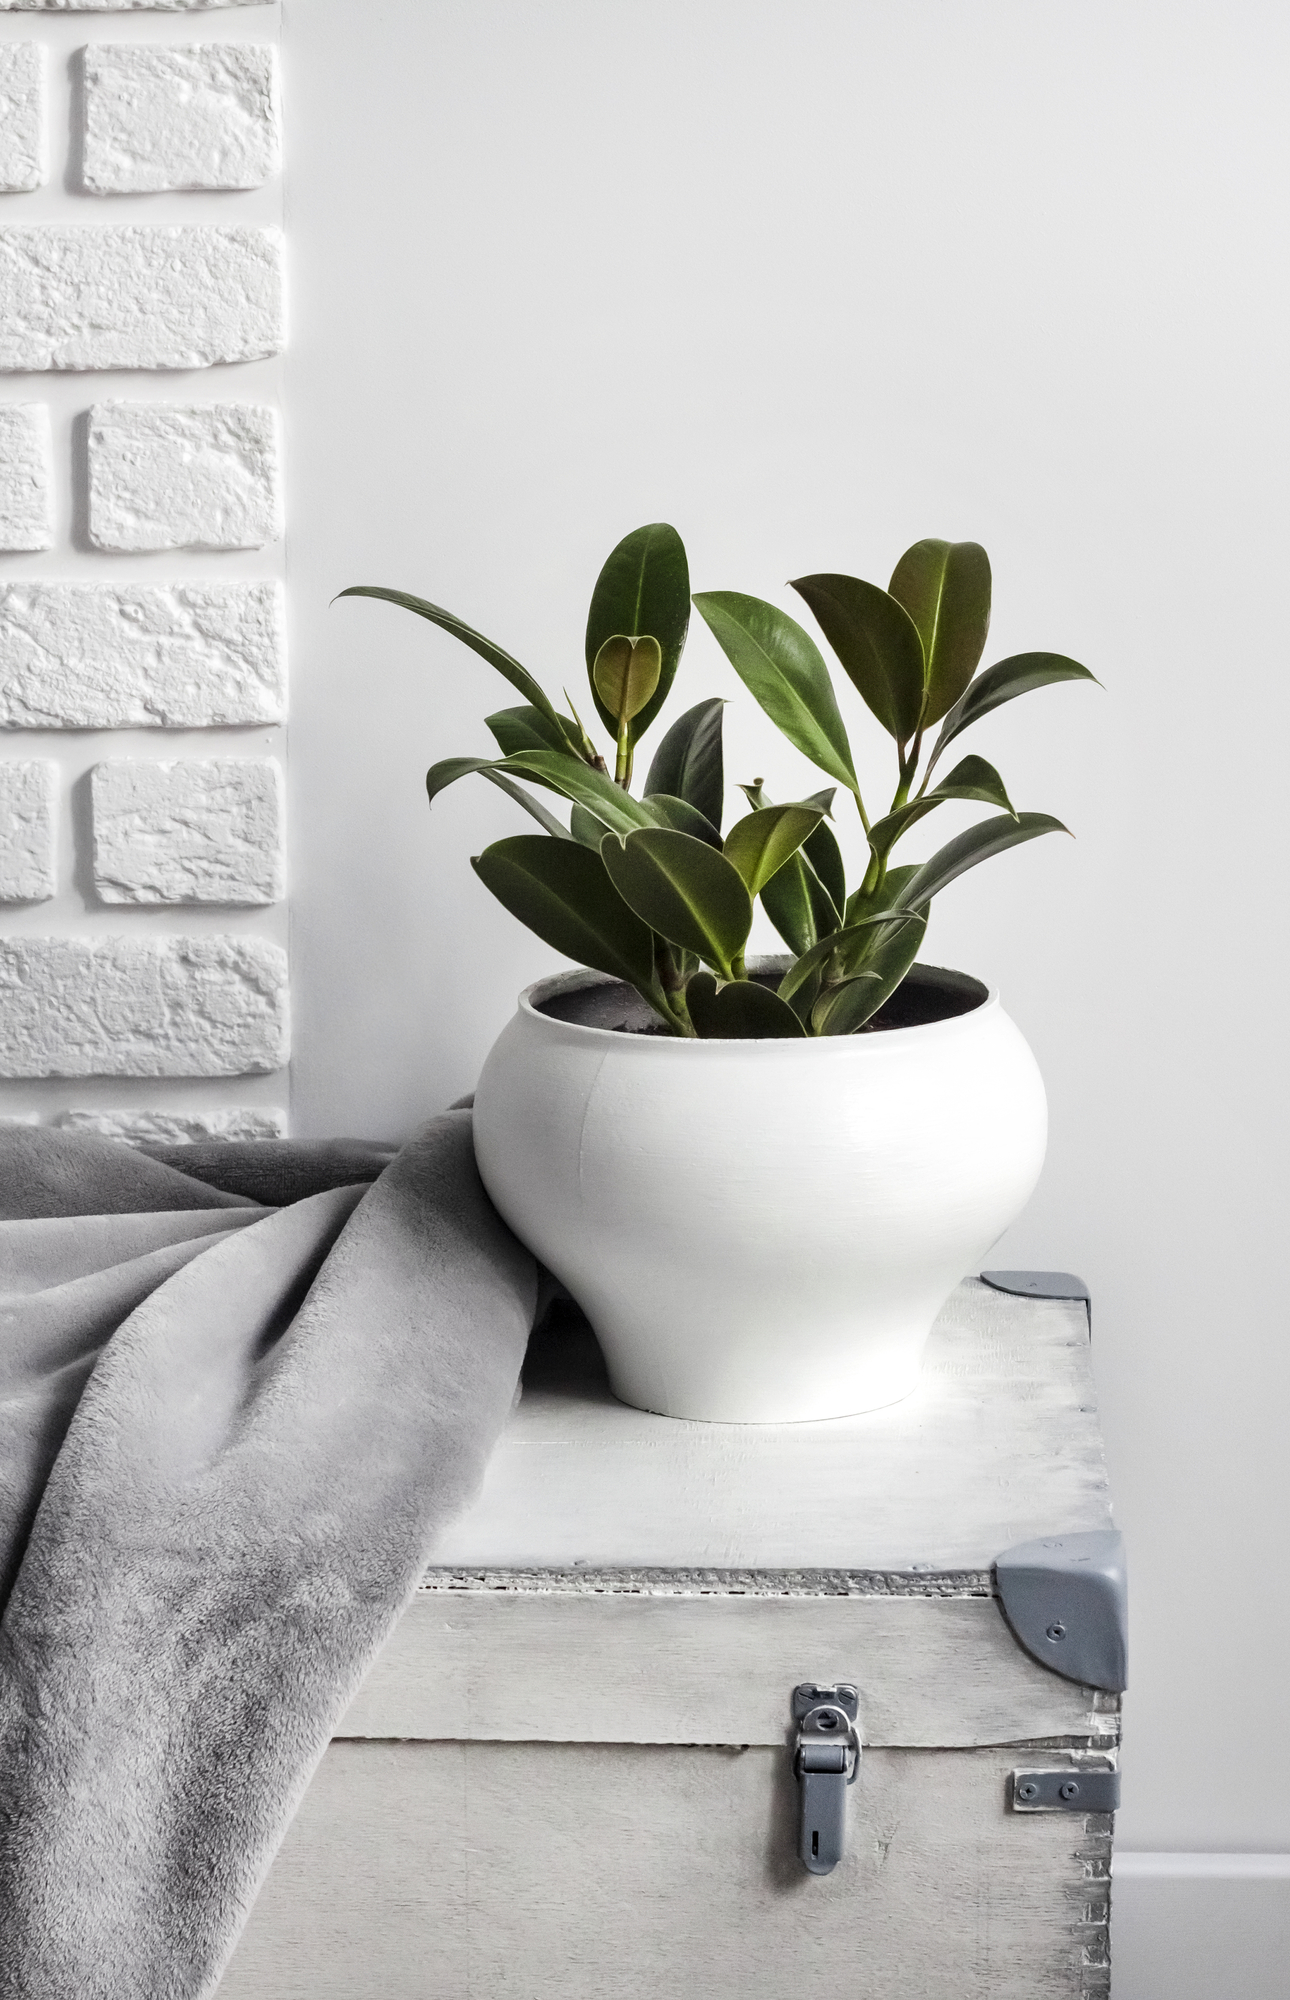 White wooden box with young rubber plant in white flower pot and gray soft fleece blanket on it. White wall with bricks on background